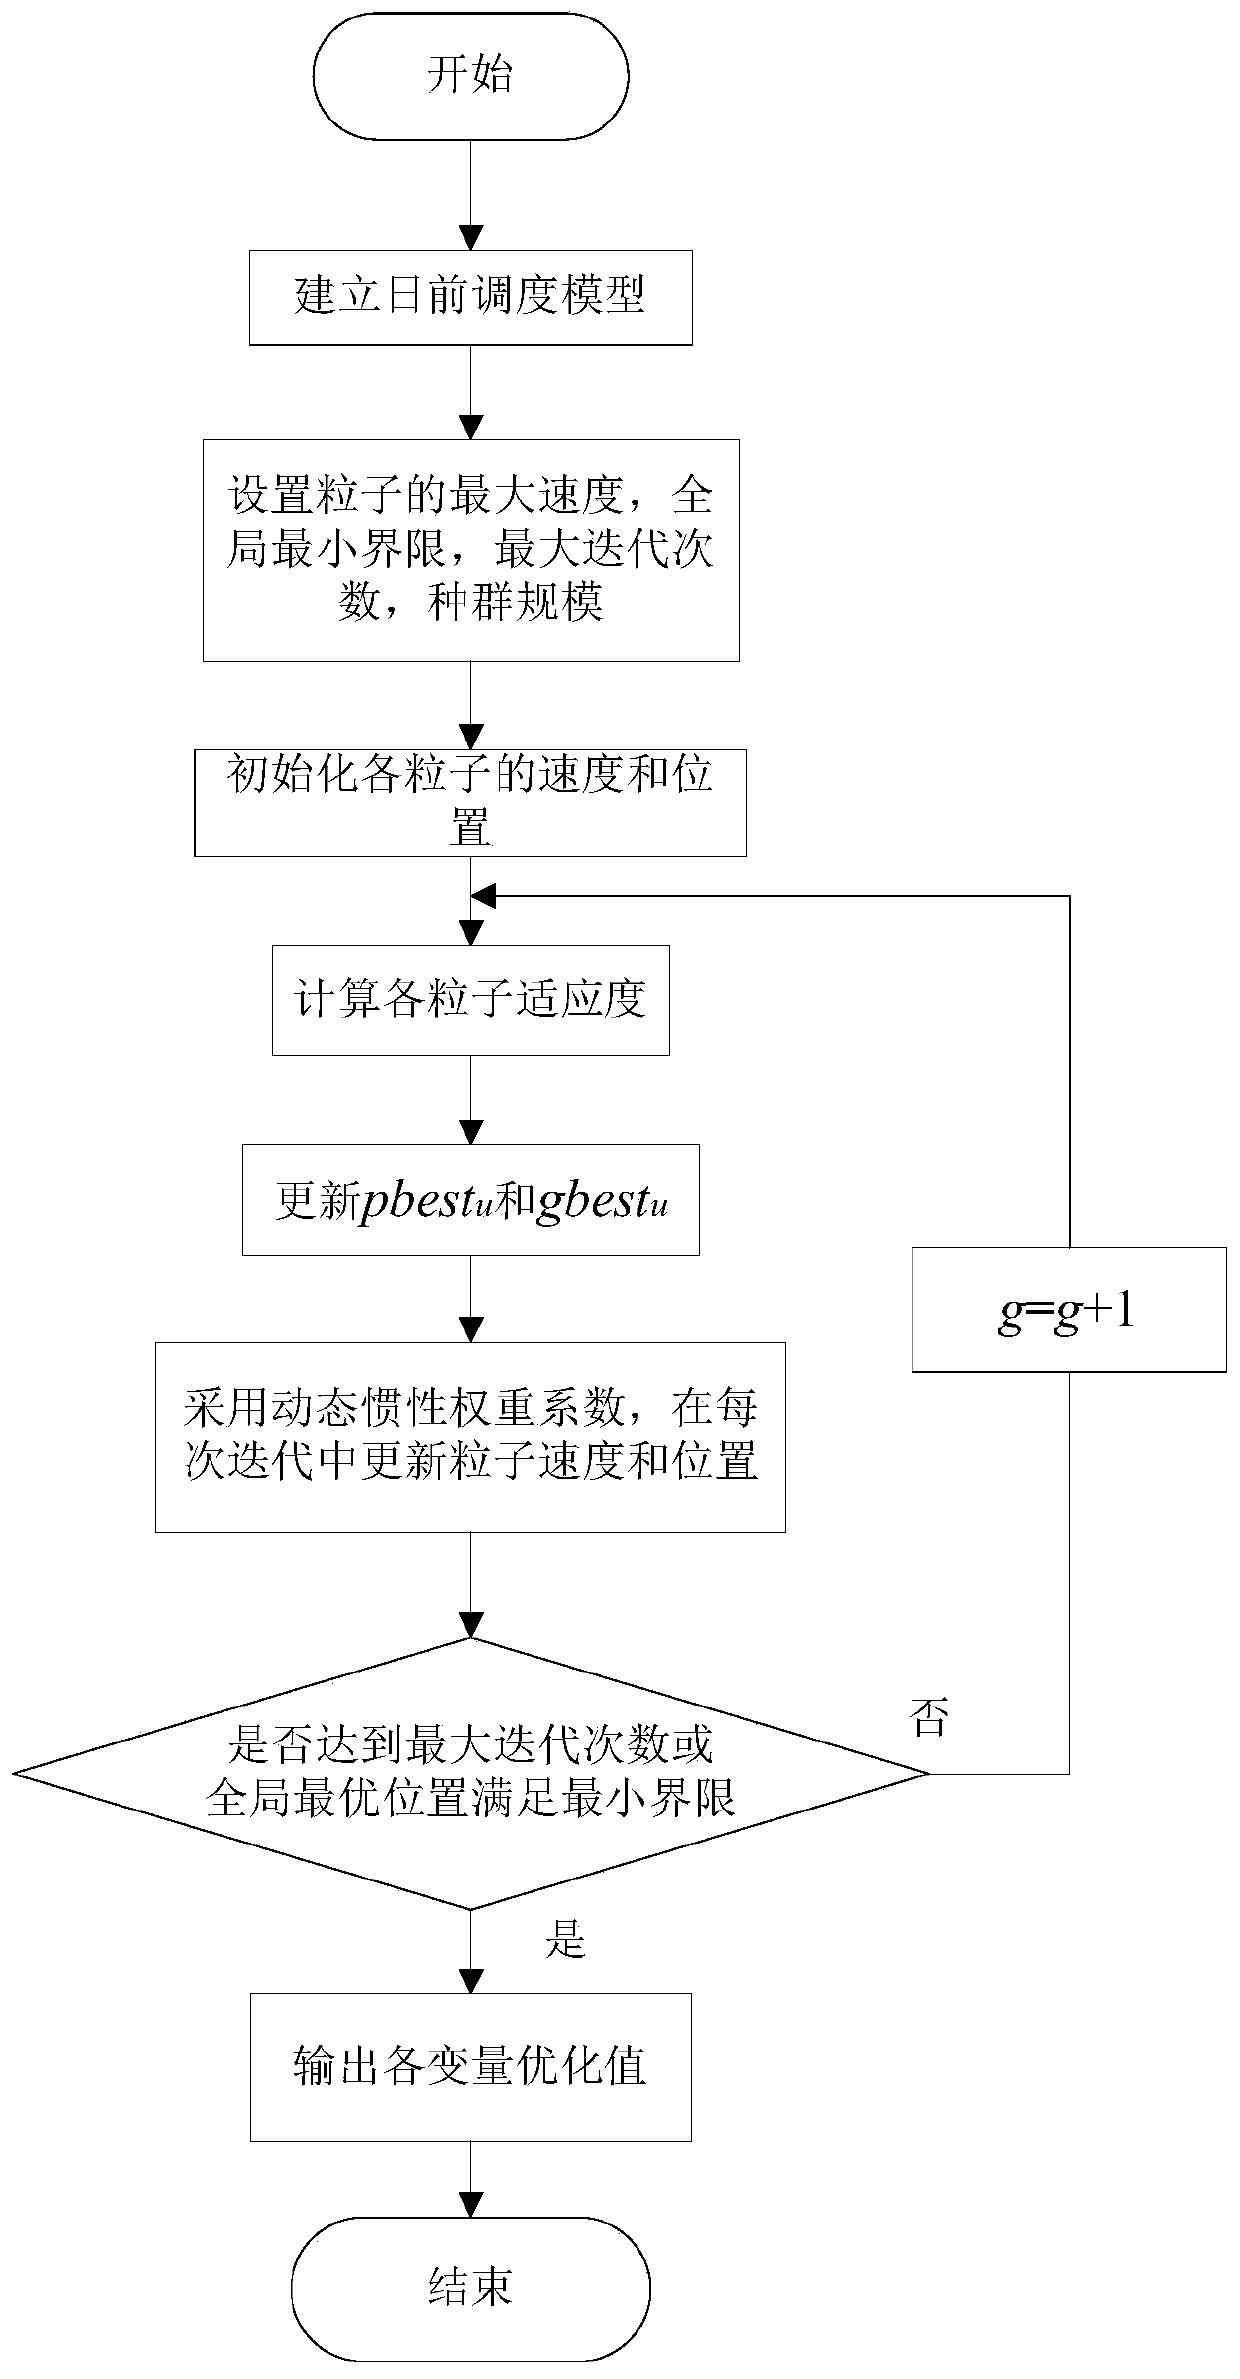 Two-stage source load storage optimization scheduling method for wind power consumption